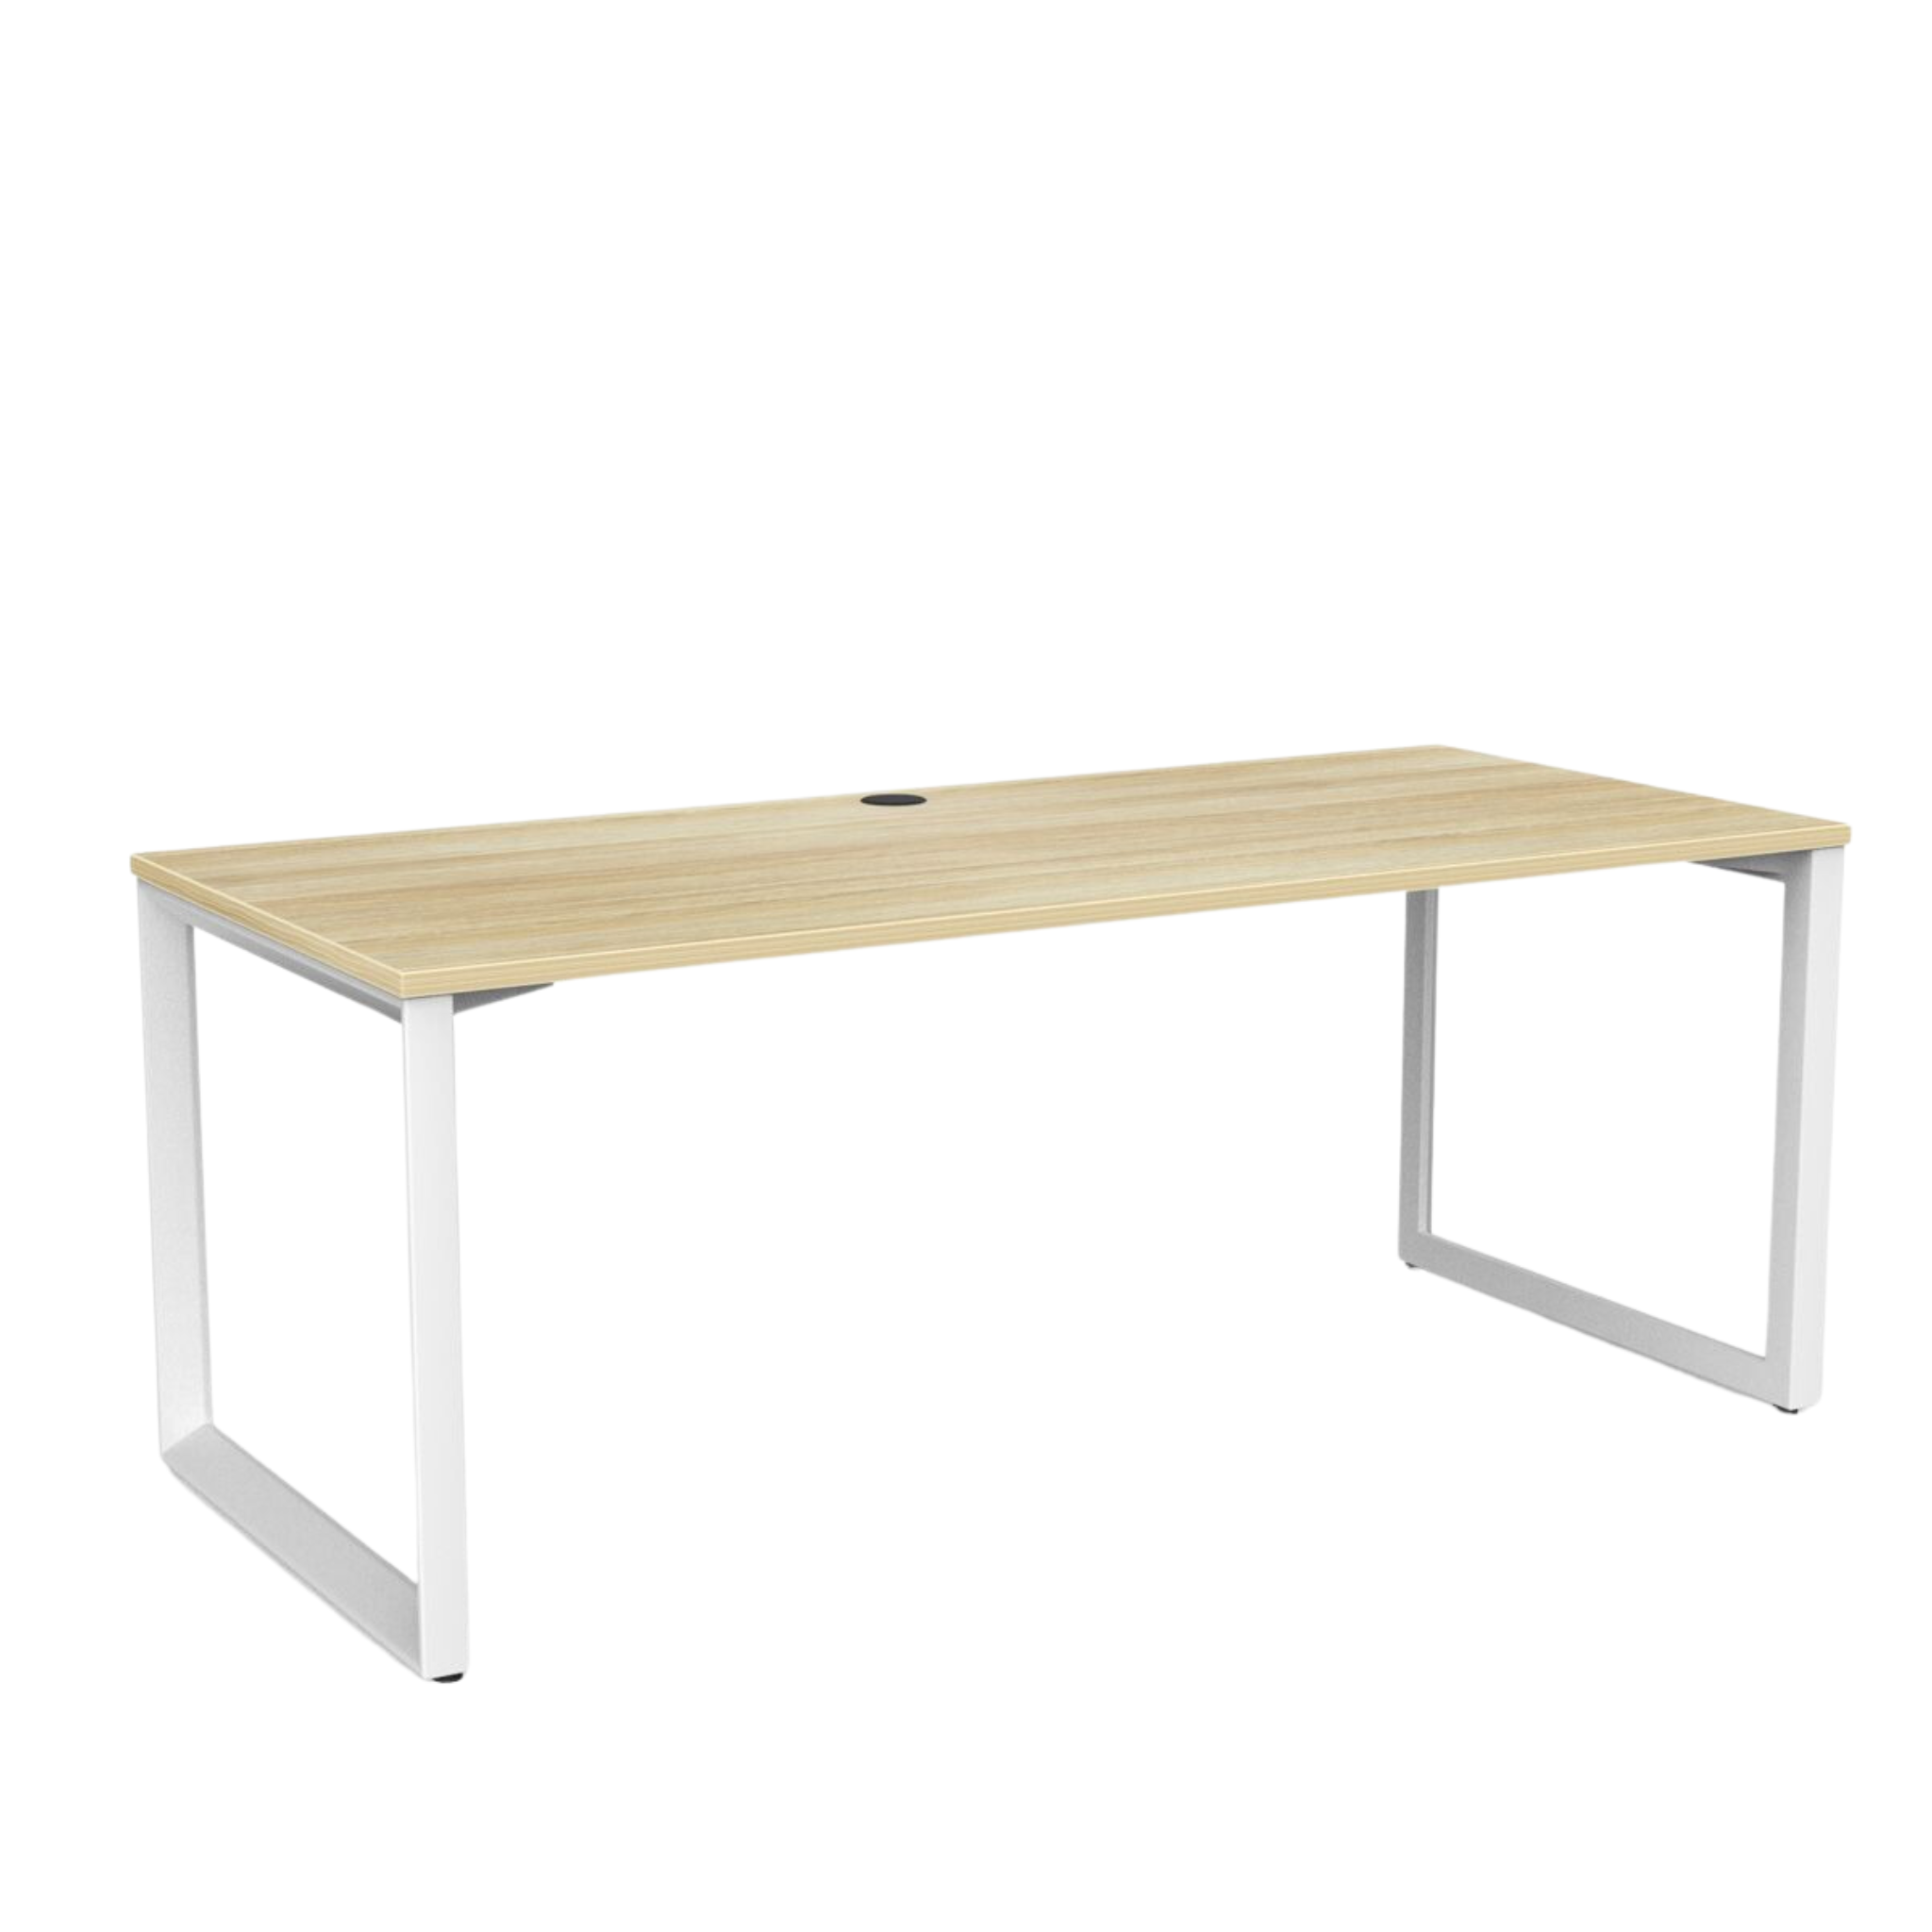 Anvil fixed height desk with white metal frame and atlantic oak metleca top